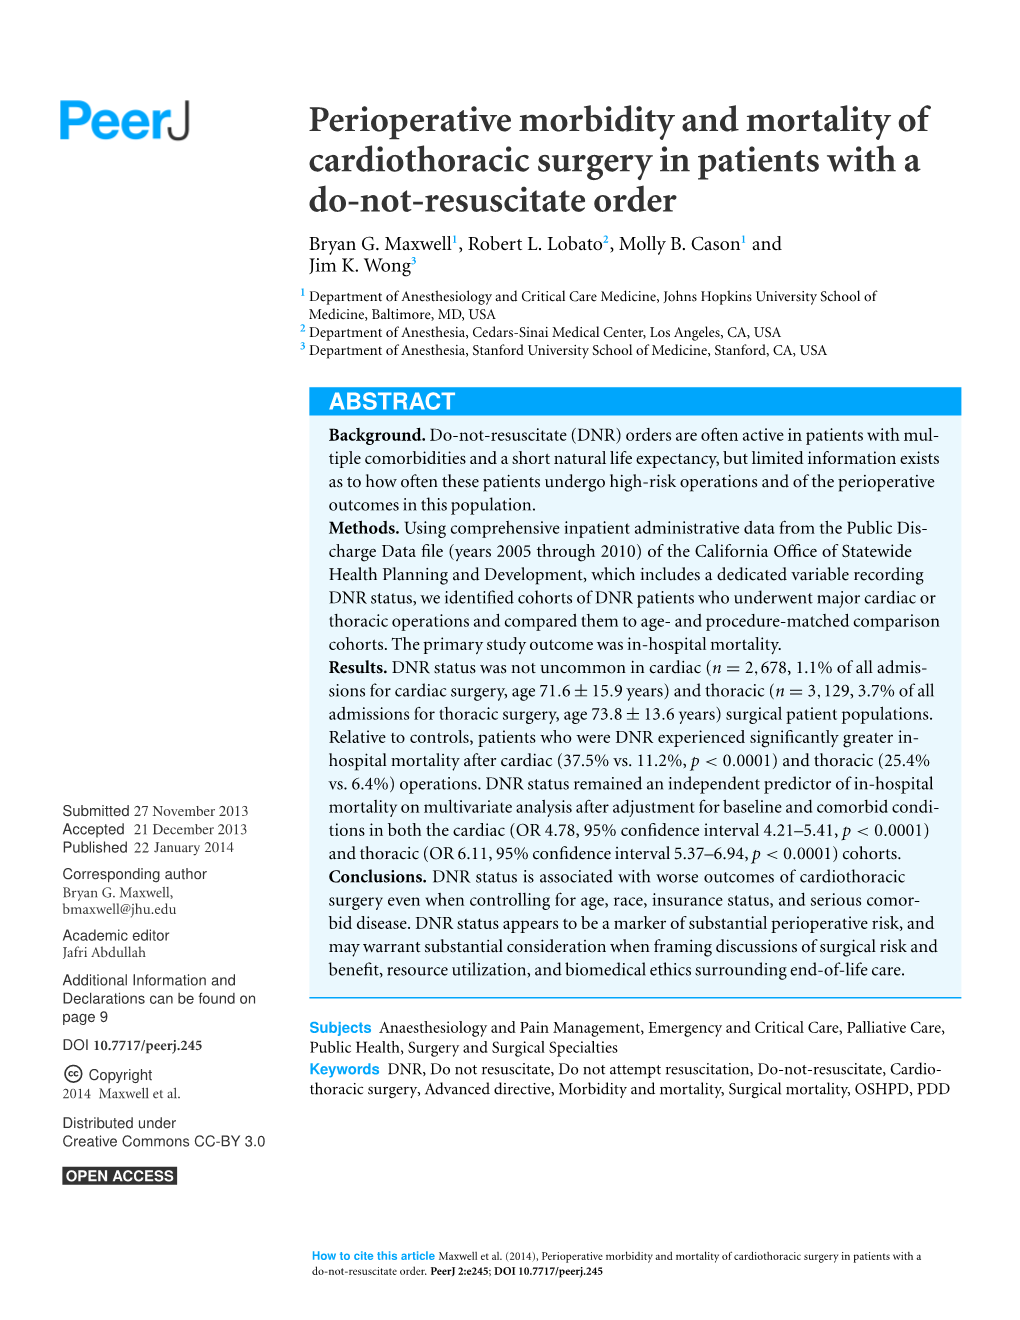 Perioperative Morbidity and Mortality of Cardiothoracic Surgery in Patients with a Do-Not-Resuscitate Order Bryan G